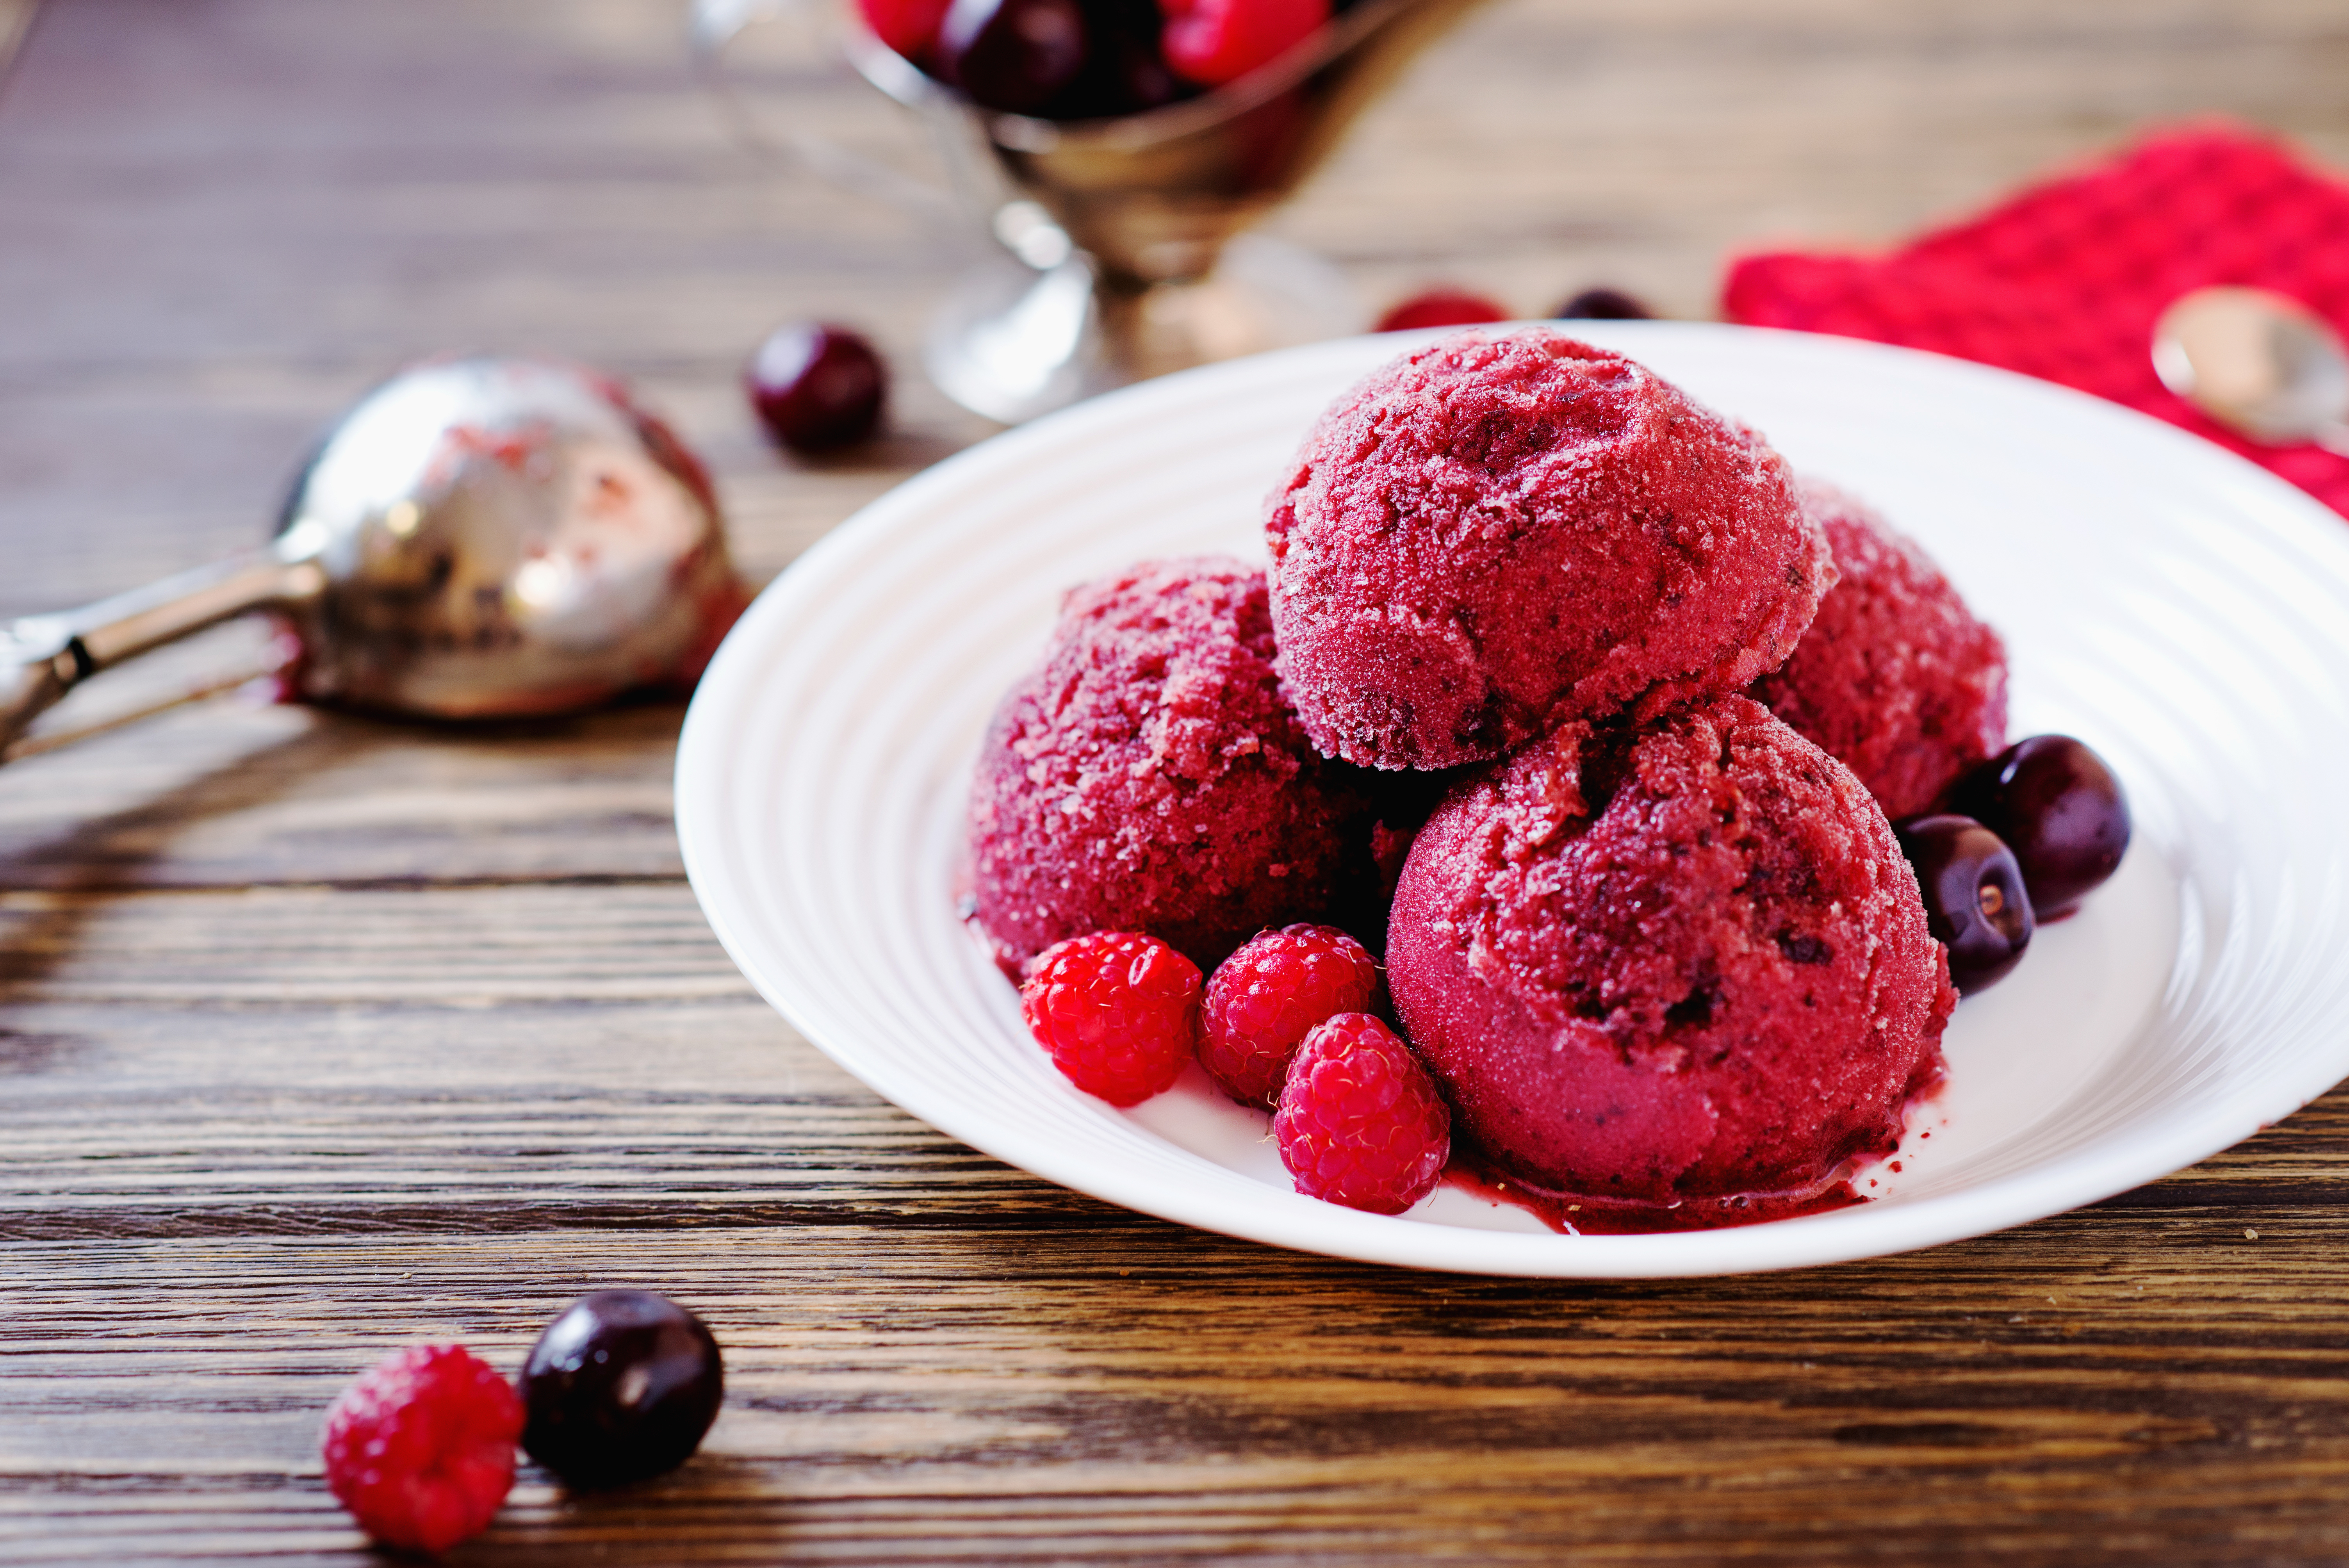 priority health personal wellness valentines day healthy meal sorbet